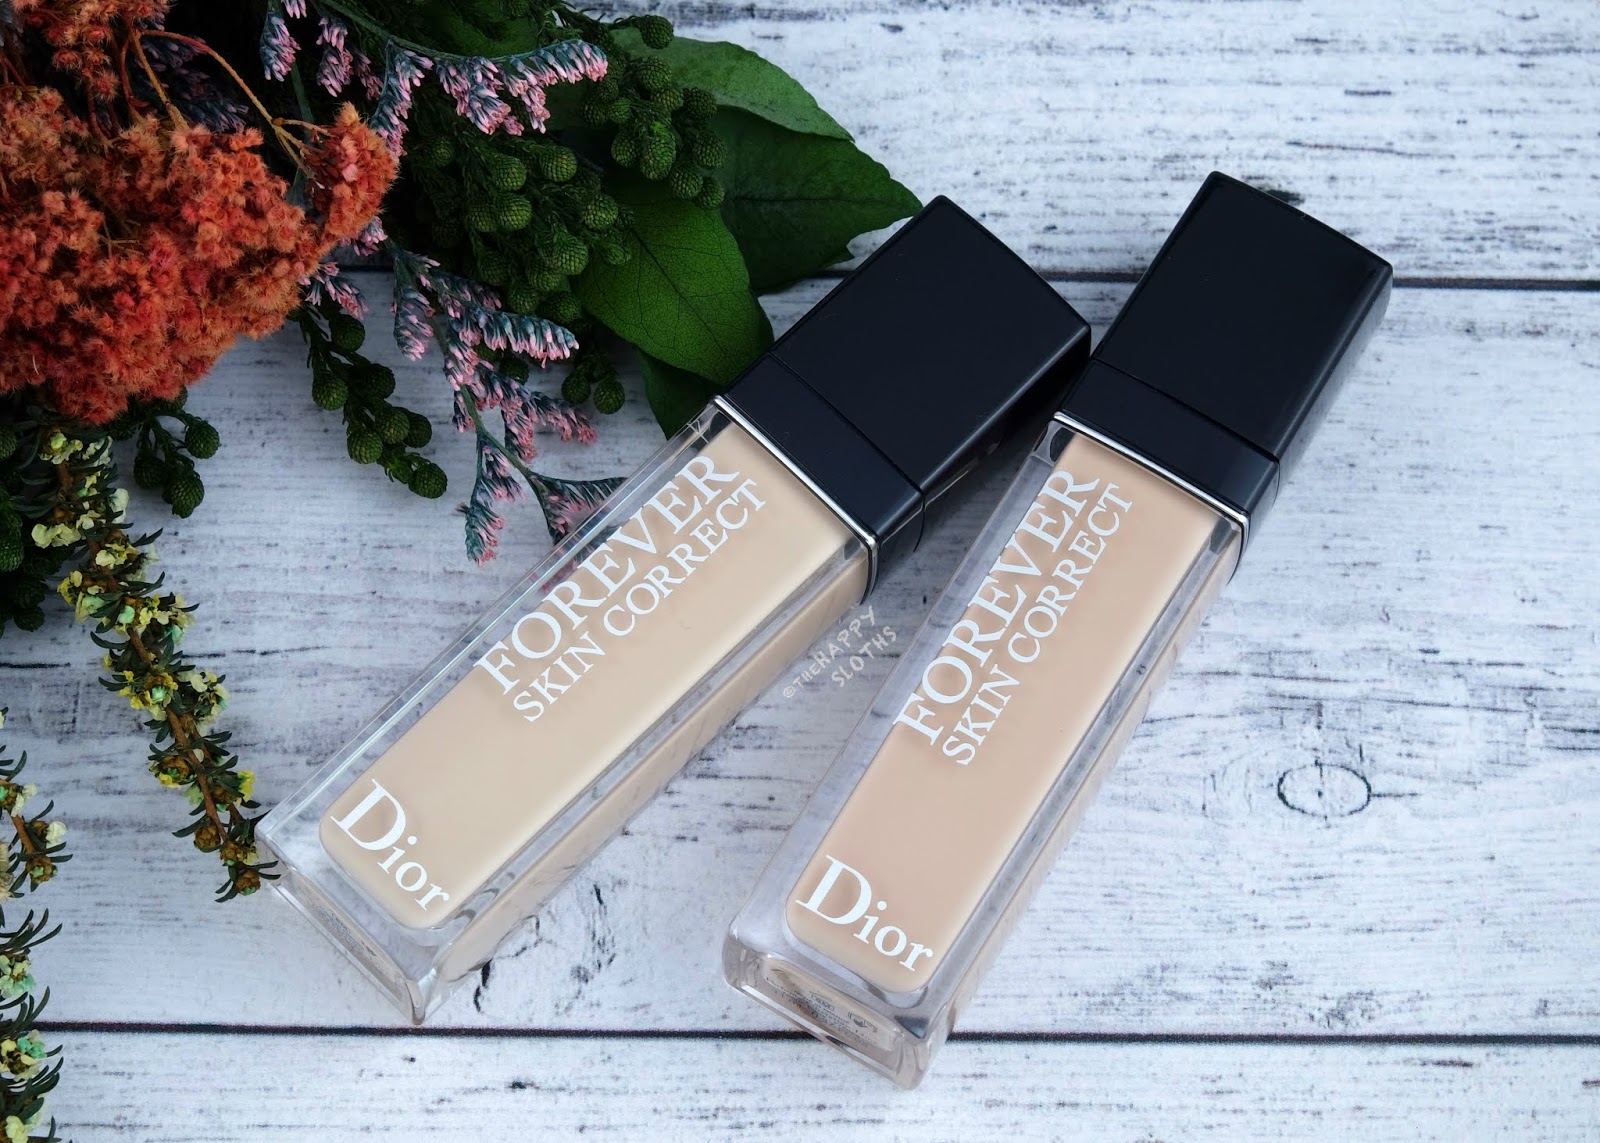 Dior Forever Skin Correct Concealer in "0N" & "1N": Review and Swatches